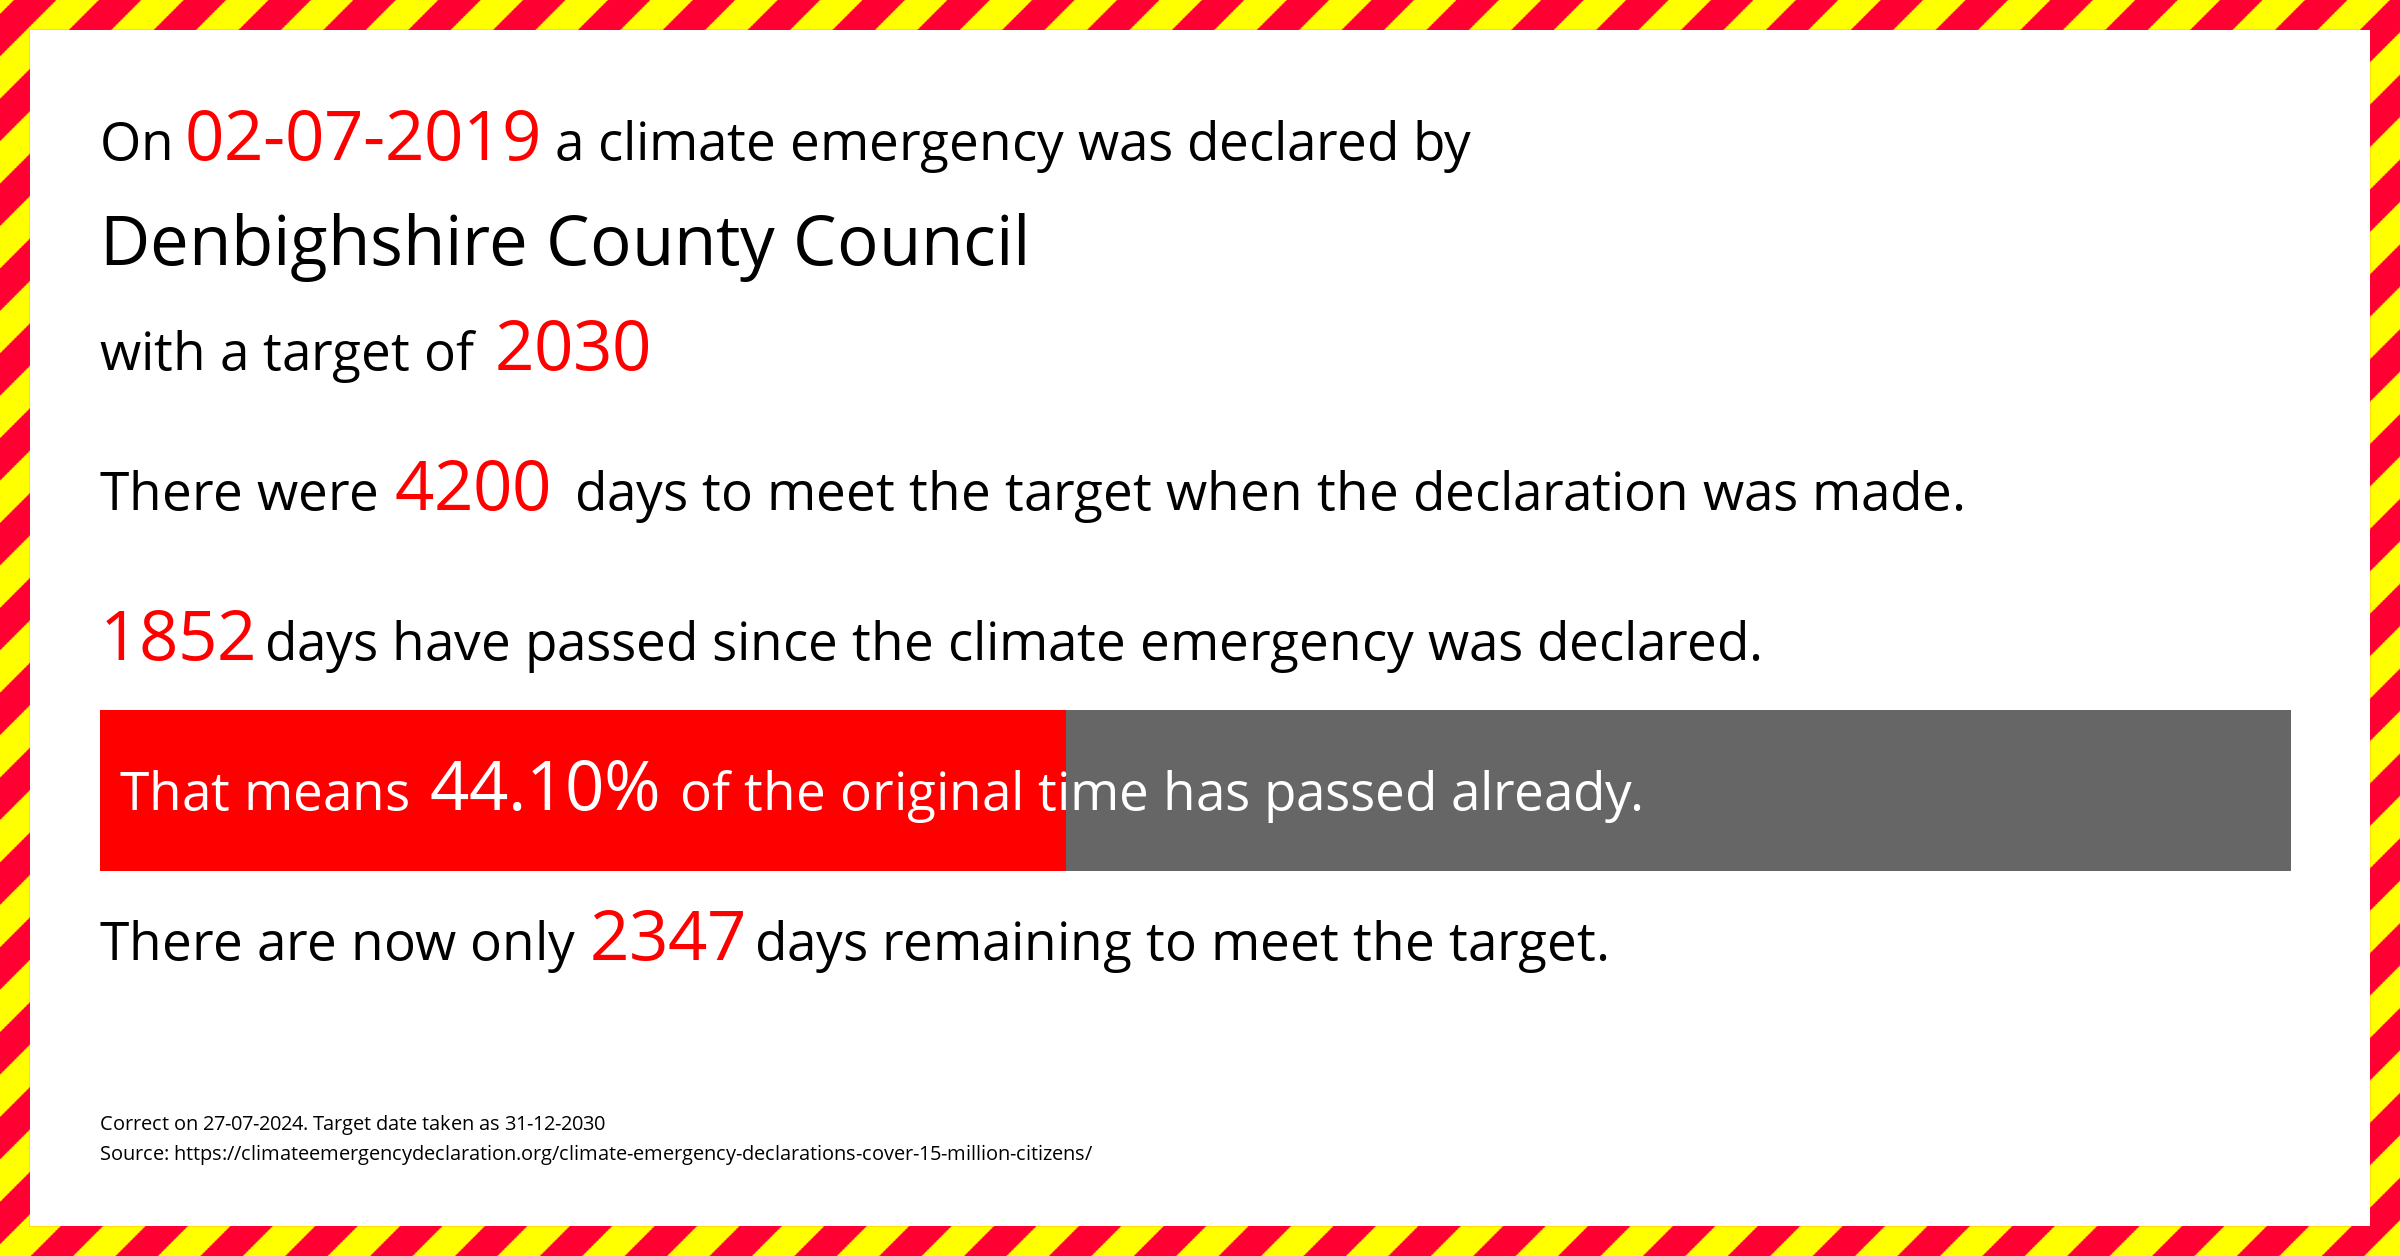 Denbighshire County Council declared a Climate emergency on Tuesday 2nd July 2019, with a target of 2030.